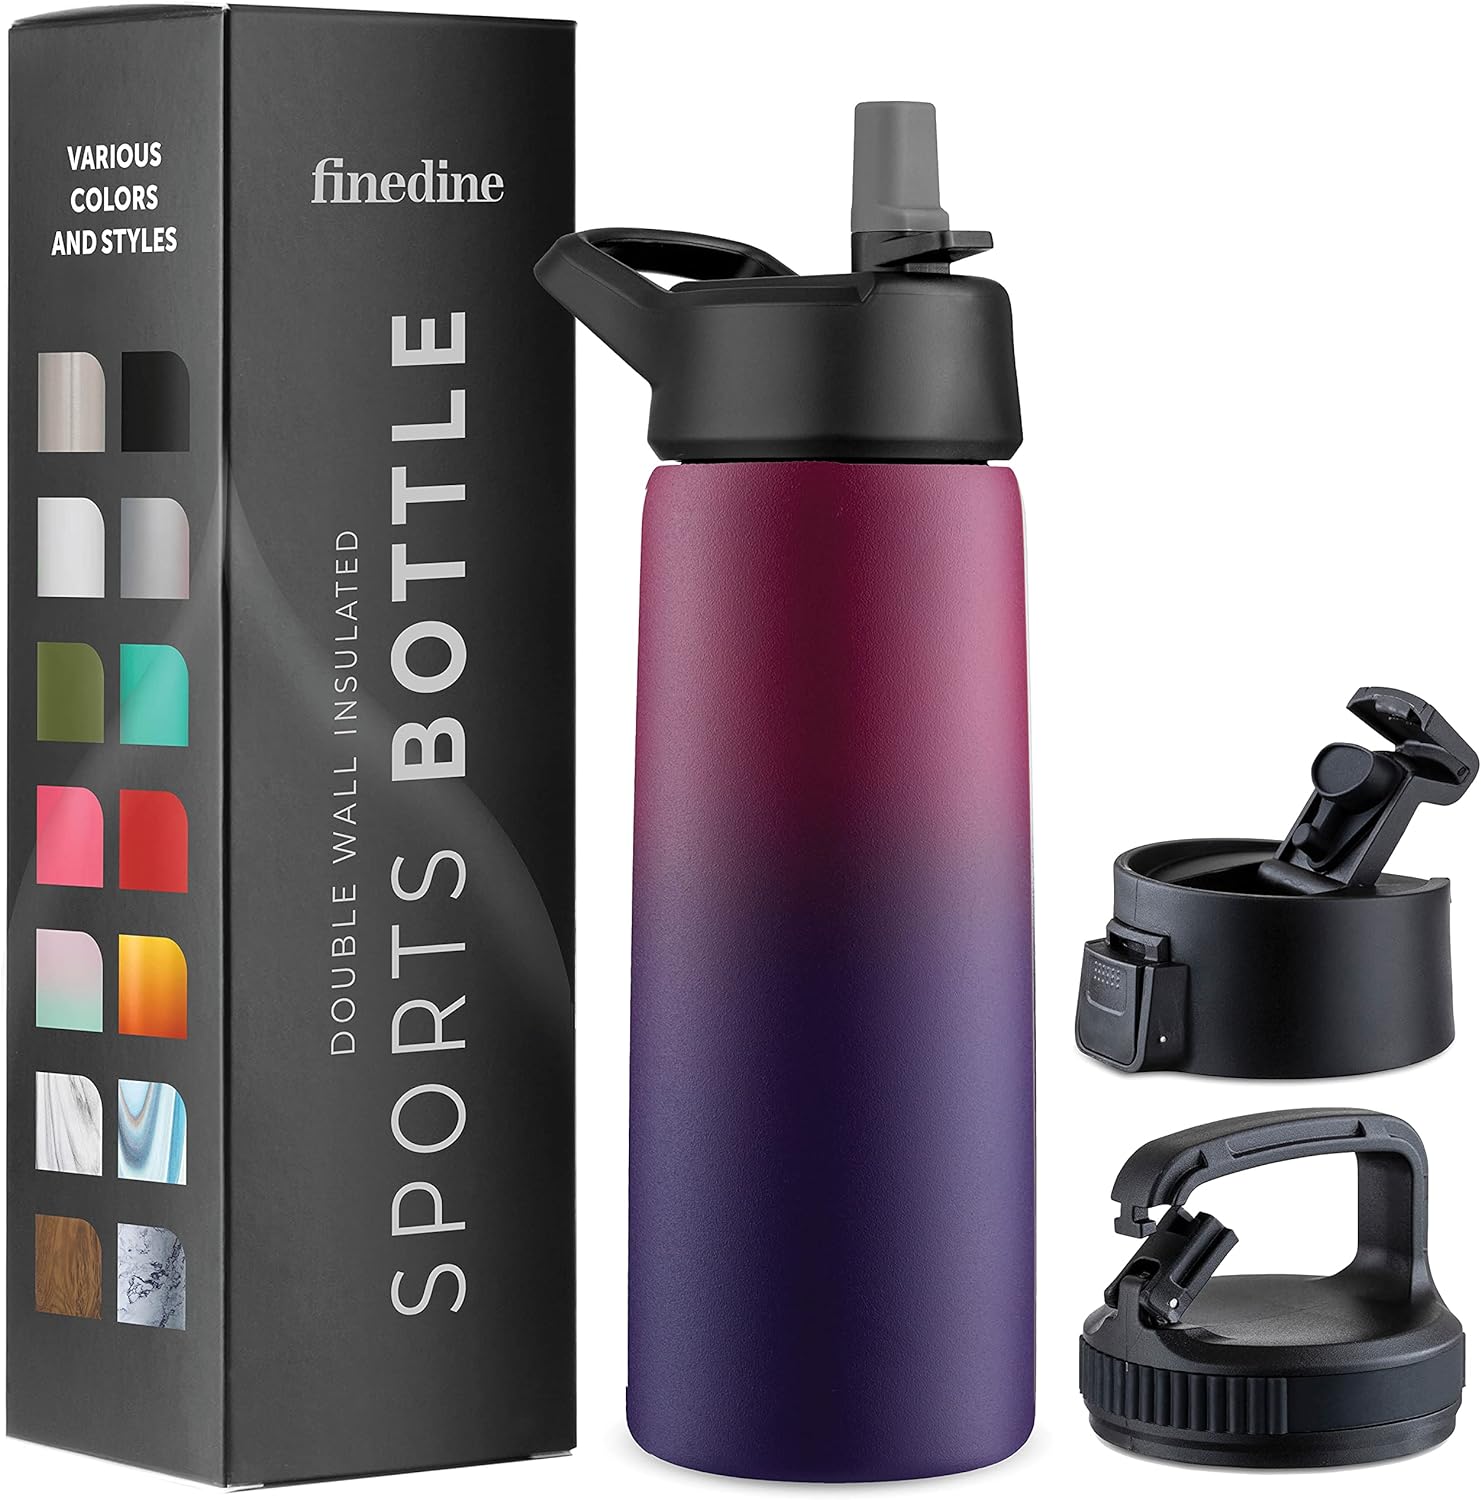 FineDine Insulated Water Bottles with Straw - 25 Oz Stainless Steel Metal Water Bottle W/ 3 Lids - Reusable for Travel, Camping, Bike, Sports - Dreamy Purple